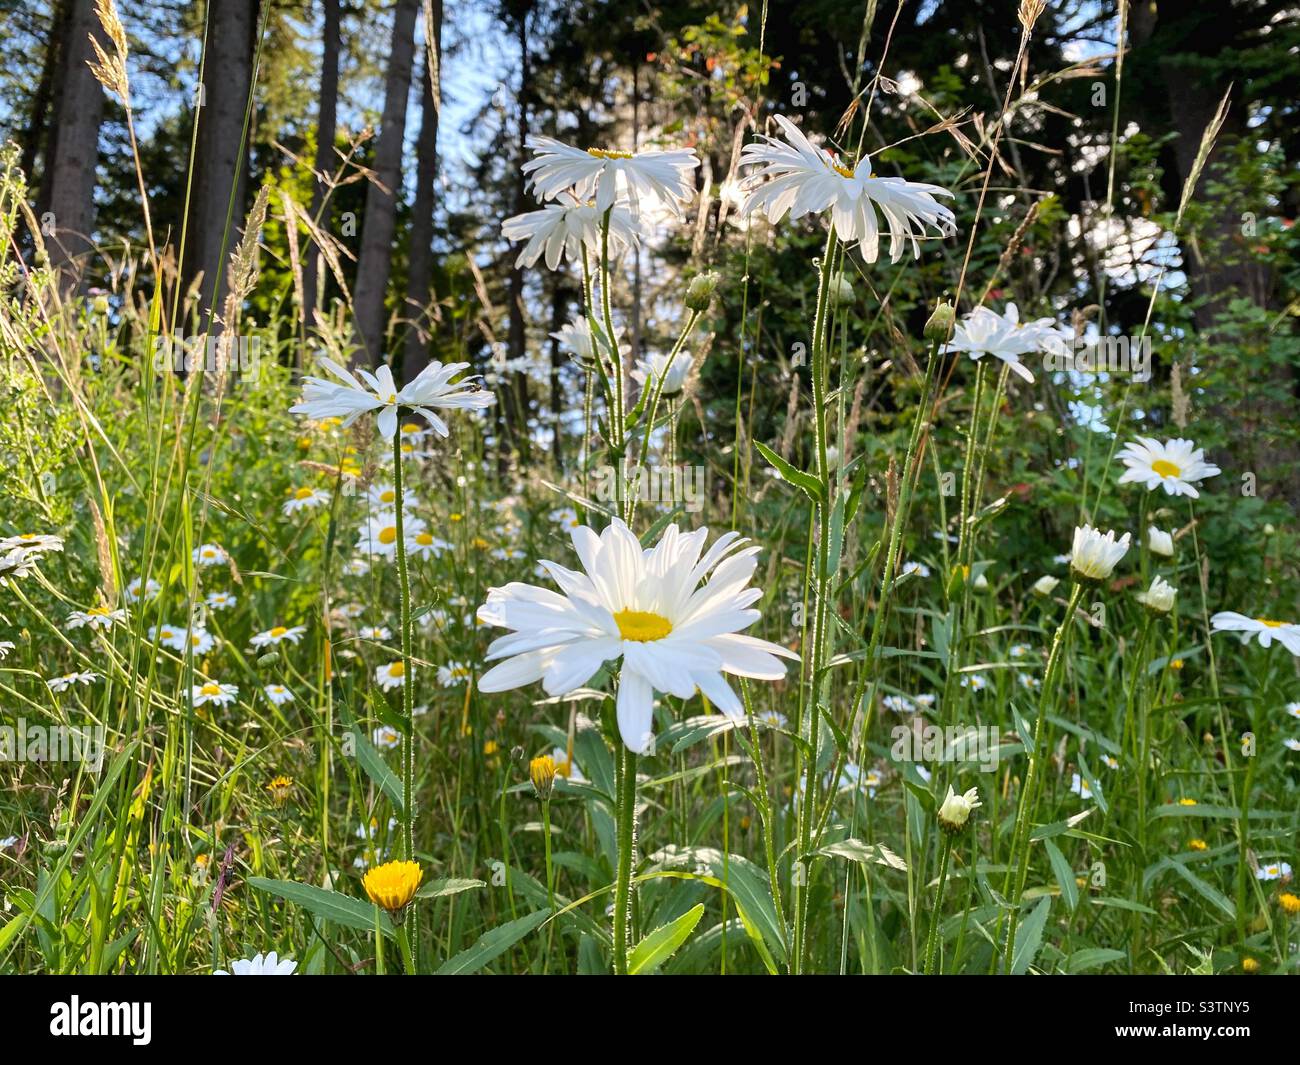 Daisies and other wildflowers in a meadow. Stock Photo